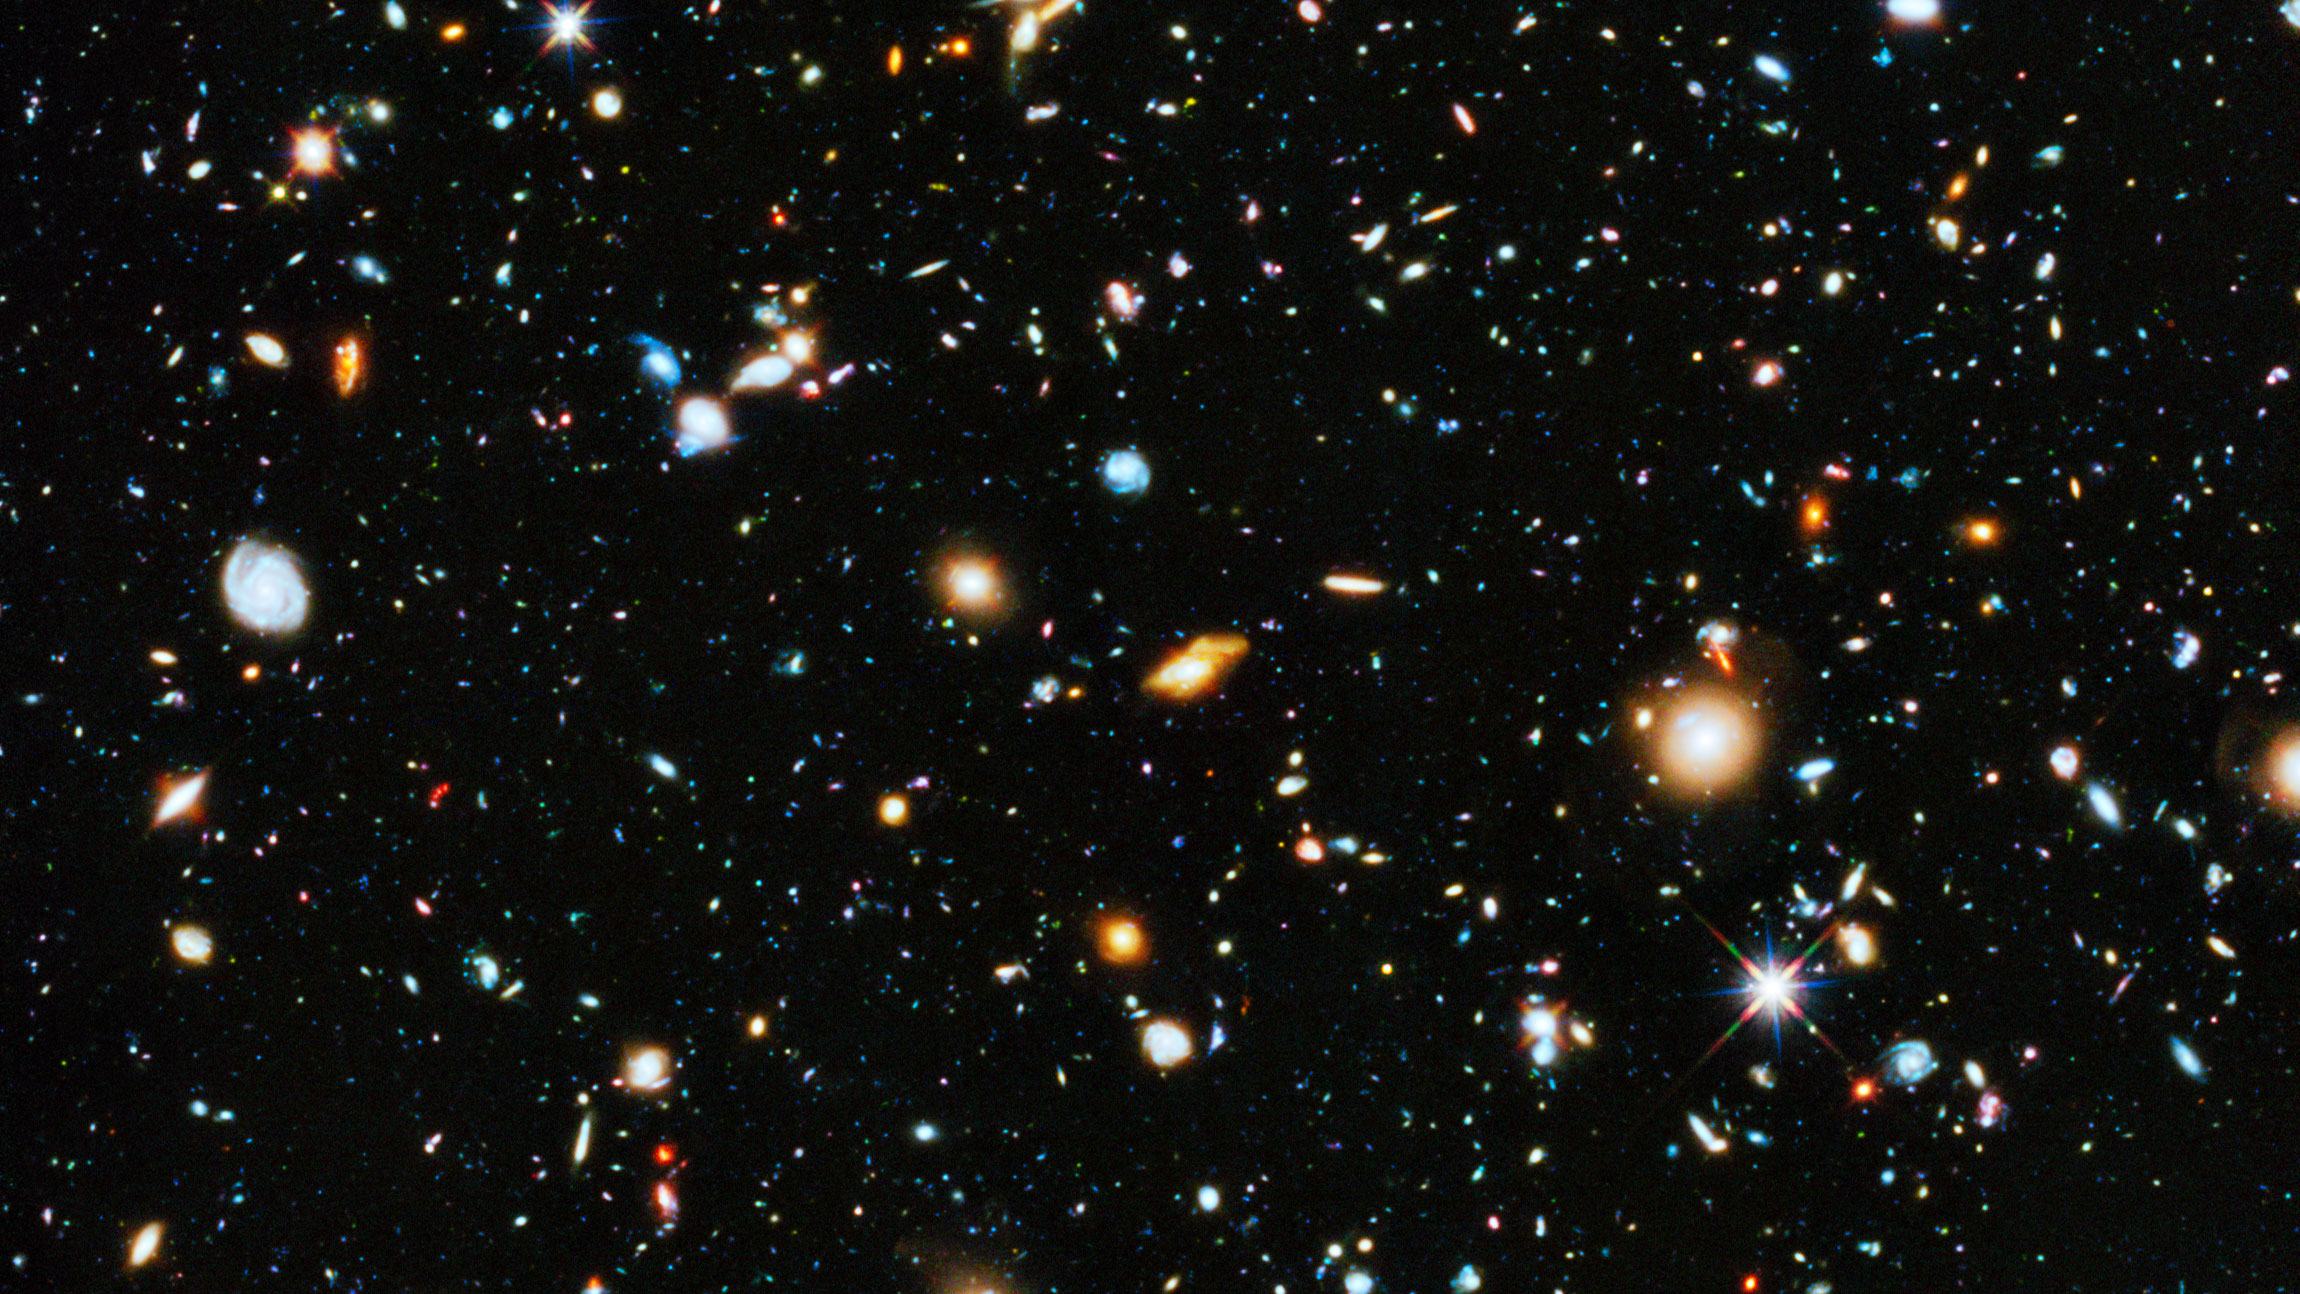 Colorful View of Universe Captured by Space Telescope